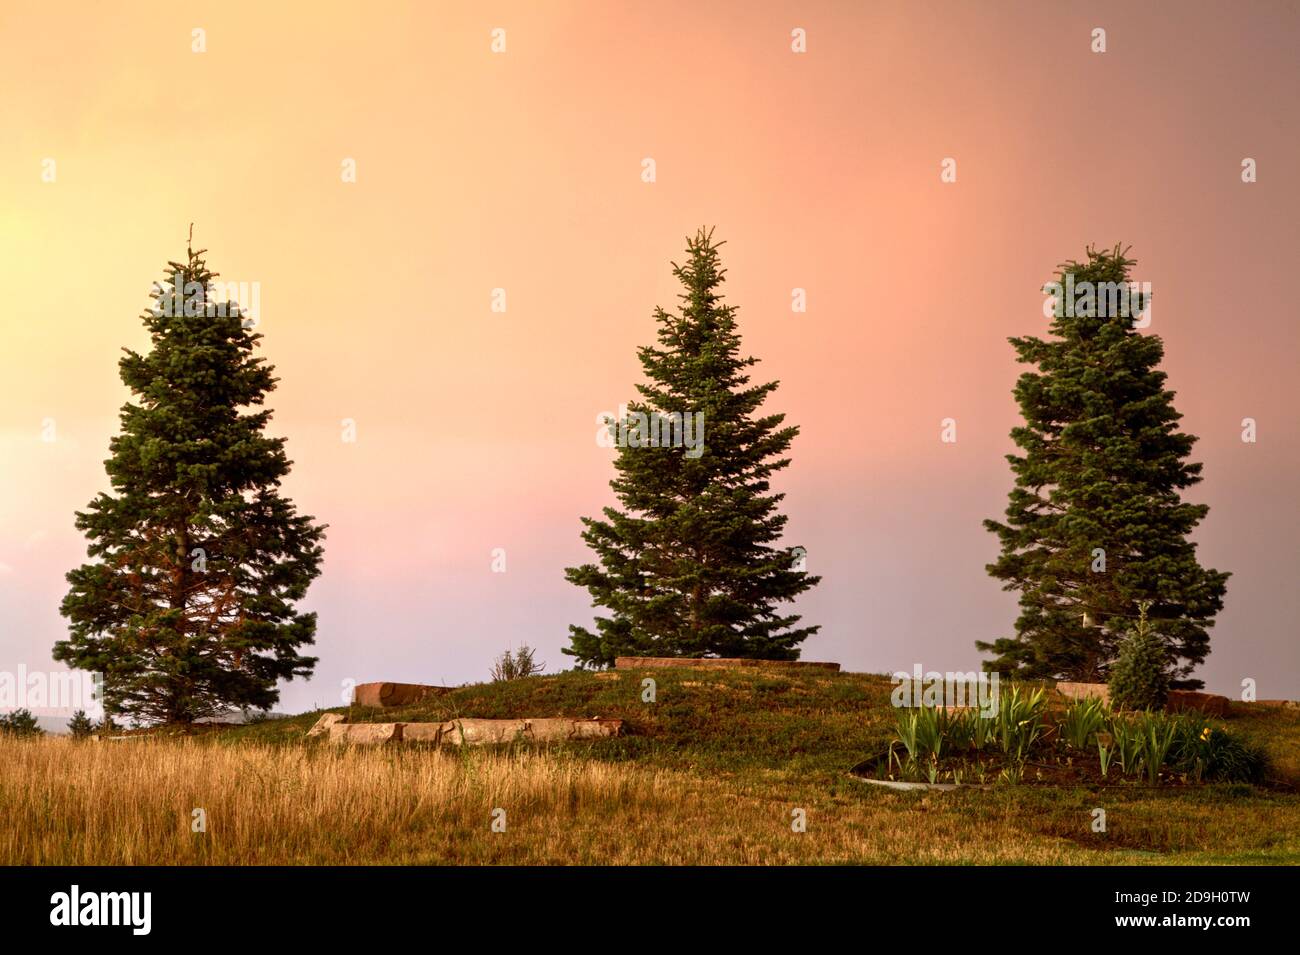 Three Colorado spruce trees grow on the crest of a small hill against the background of a sky colored by the setting sun. Stock Photo